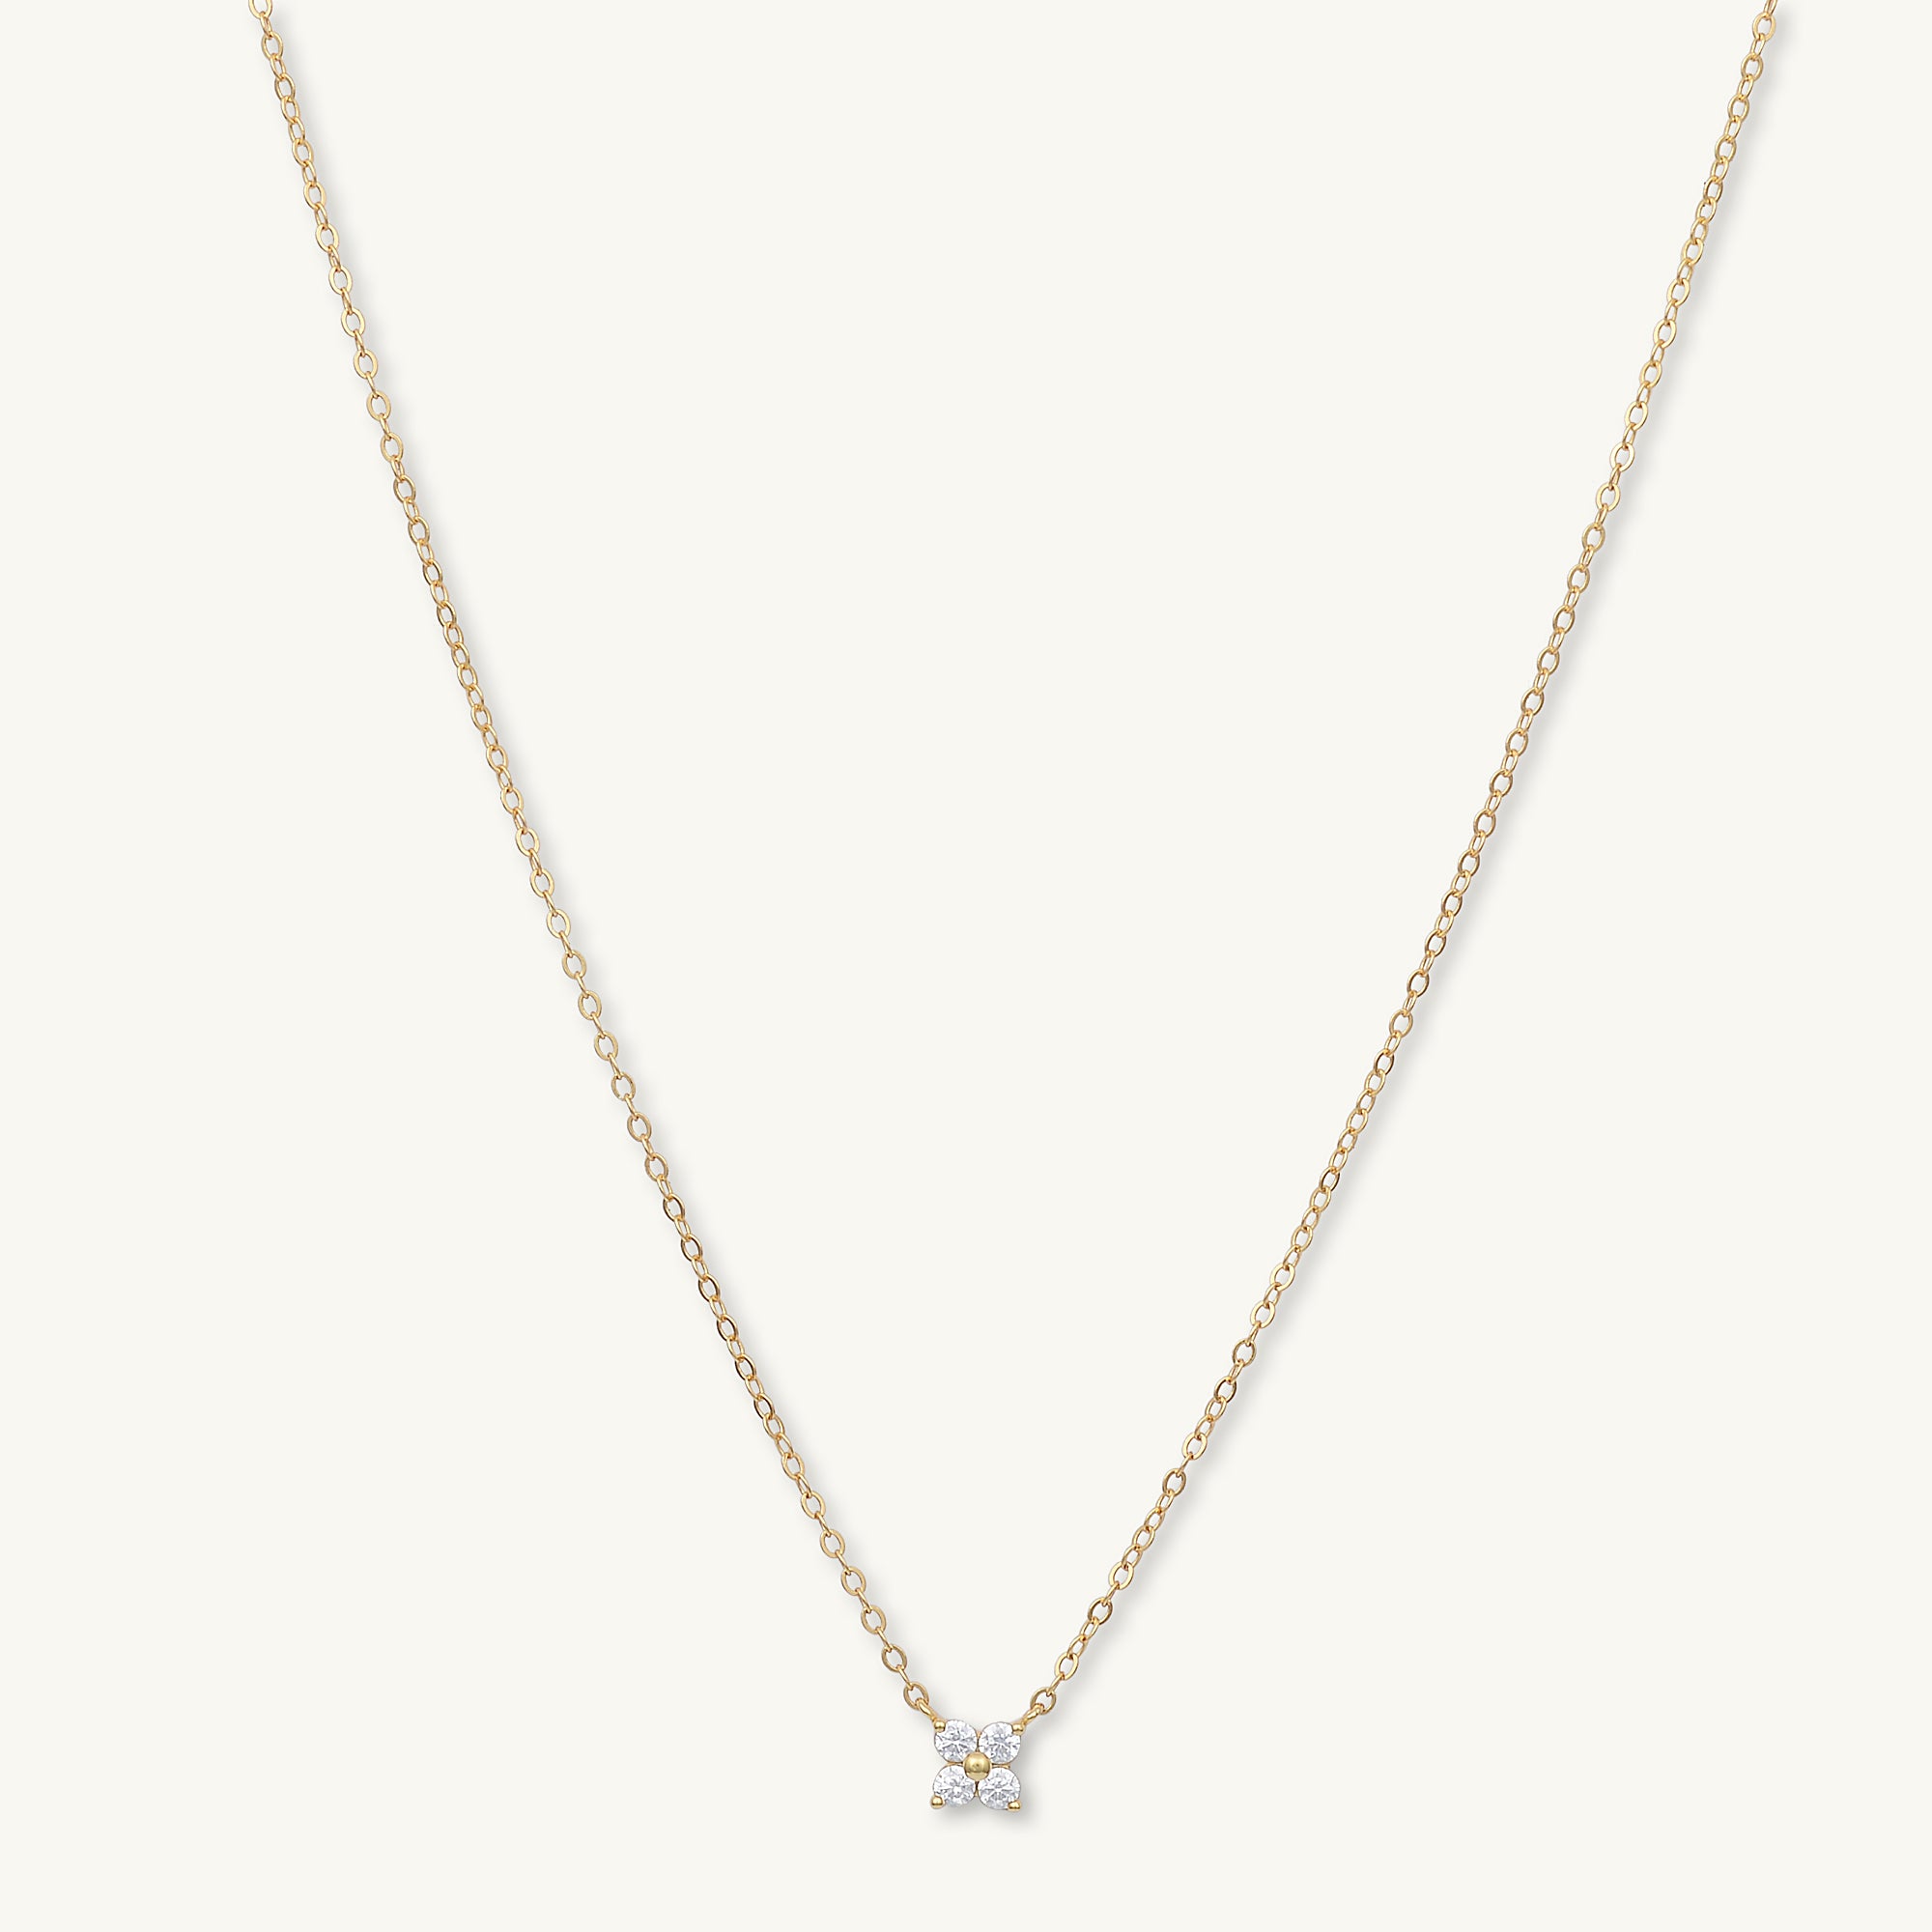 Clover Sapphire Chain Necklace